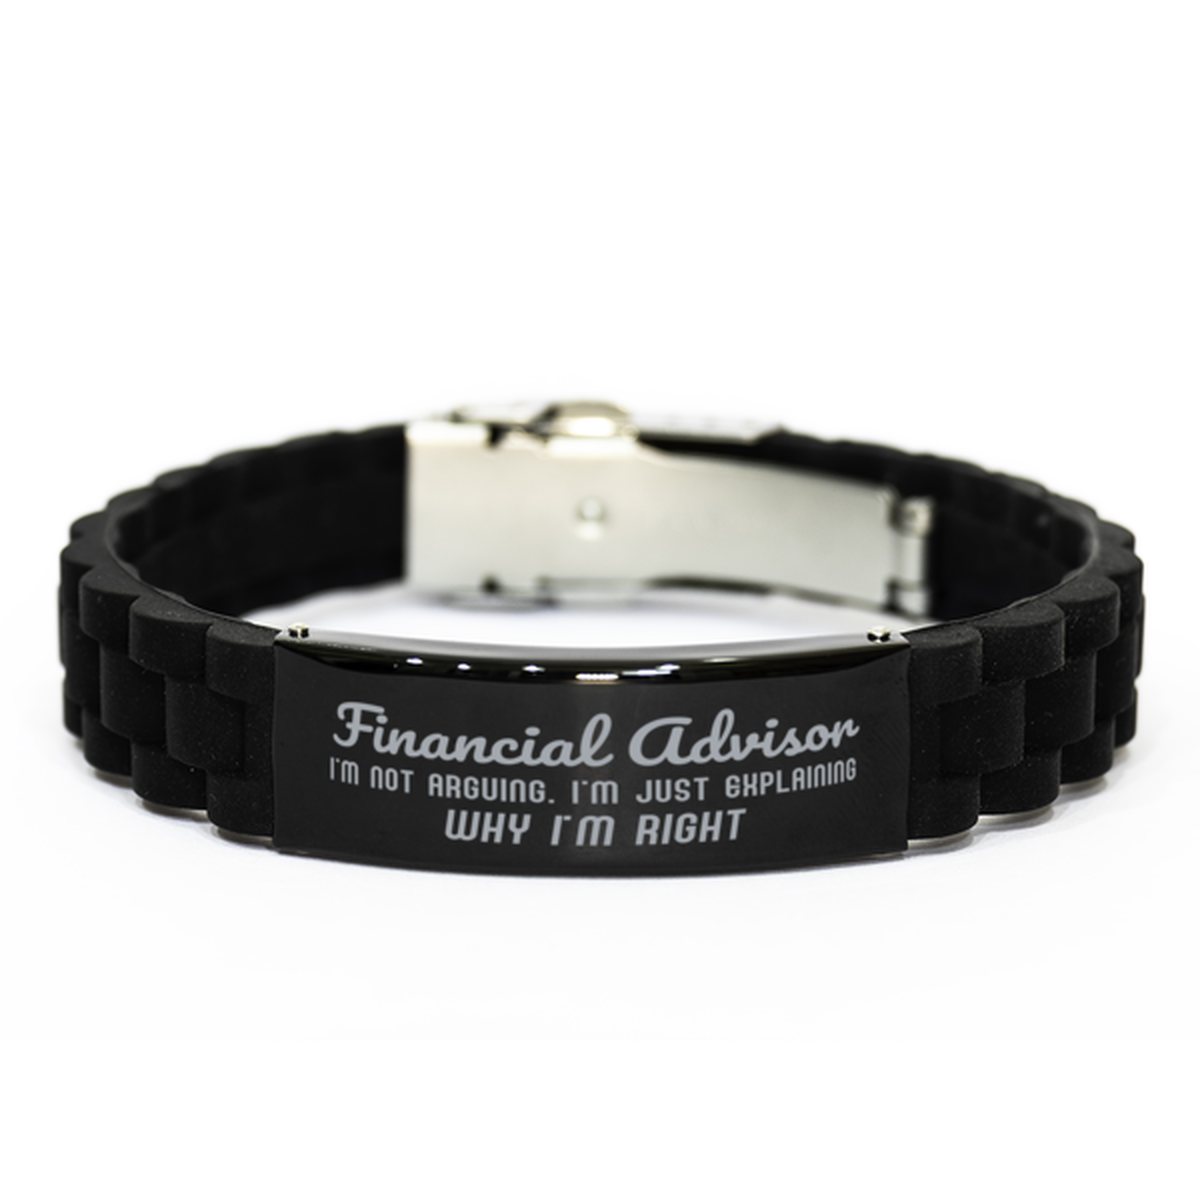 Financial Advisor I'm not Arguing. I'm Just Explaining Why I'm RIGHT Black Glidelock Clasp Bracelet, Funny Saying Quote Financial Advisor Gifts For Financial Advisor Graduation Birthday Christmas Gifts for Men Women Coworker